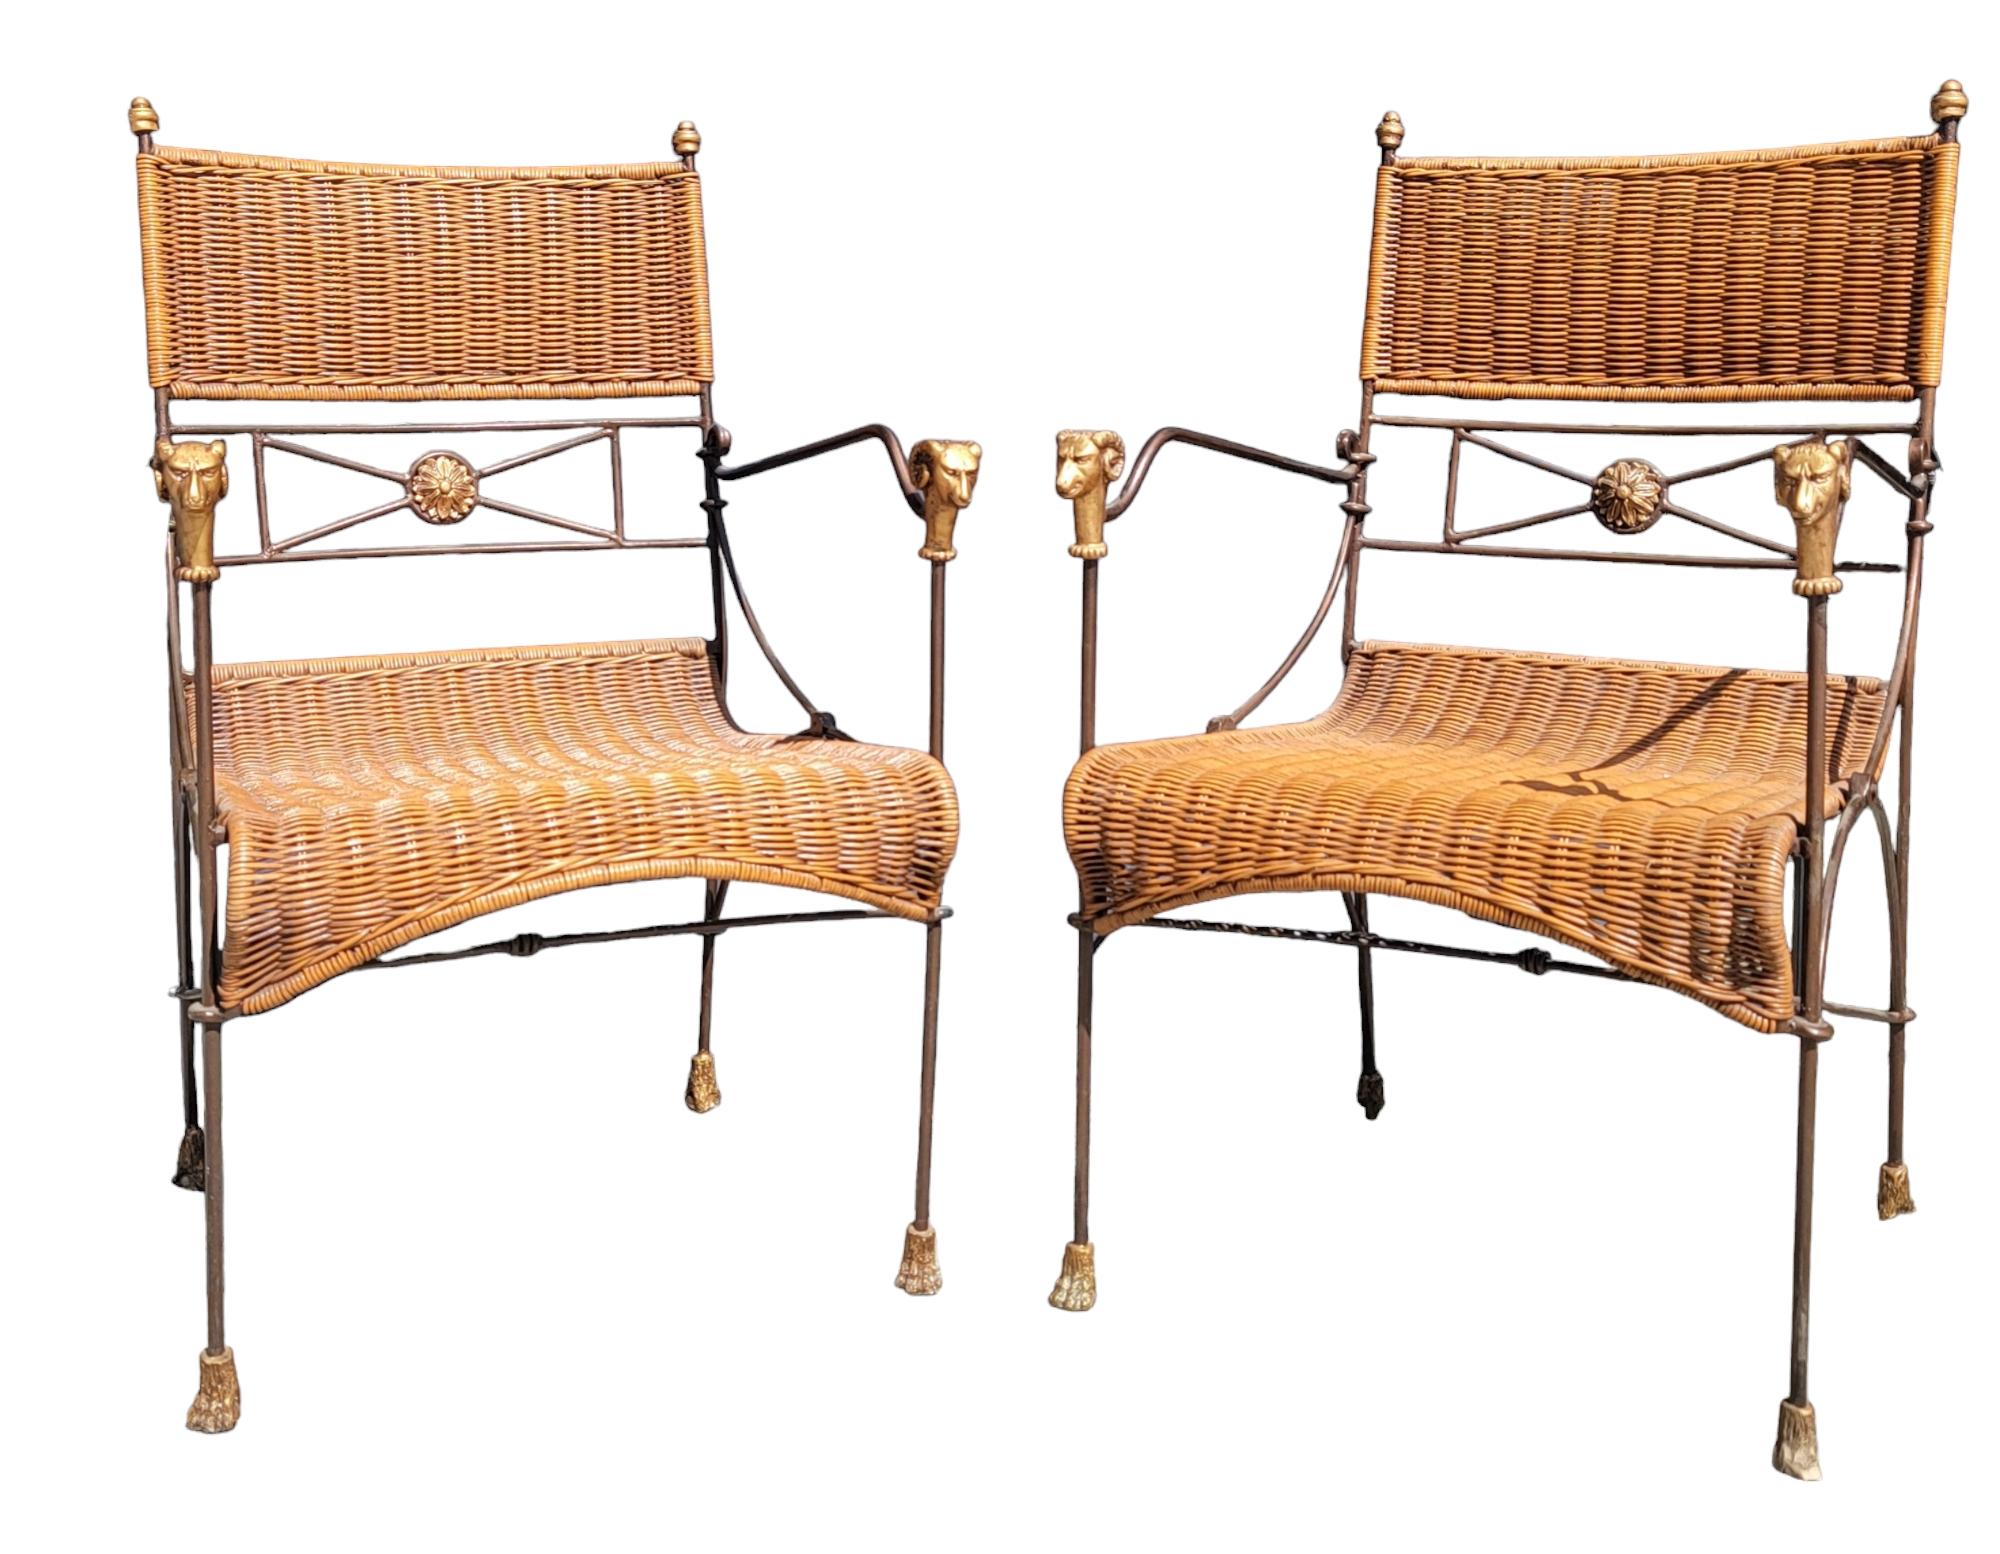 Set of Three Iron And Wicker Settee And Chair By Giacometti  For Sale 3